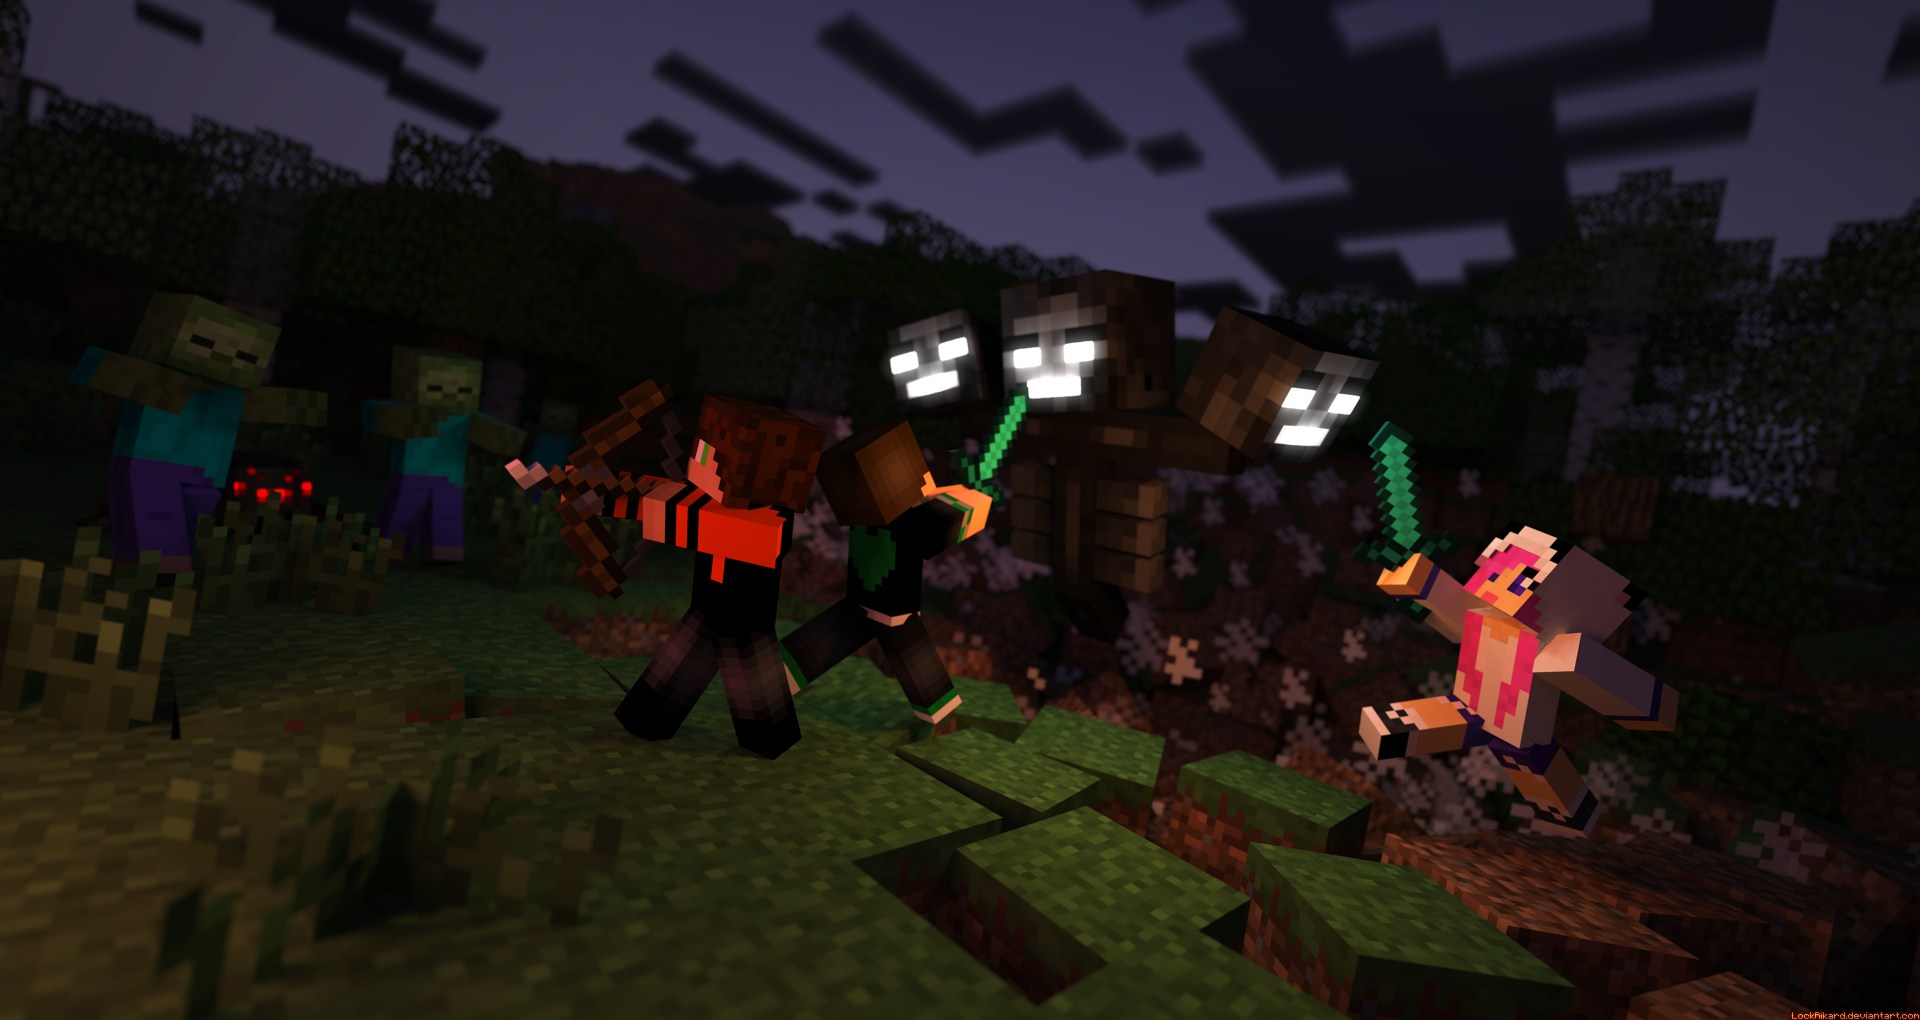 http://fc09.deviantart.net/fs70/f/2013/250/7/9/zombies__spiders__the_wither__oh_my_by_lockrikard-d6lc918.png